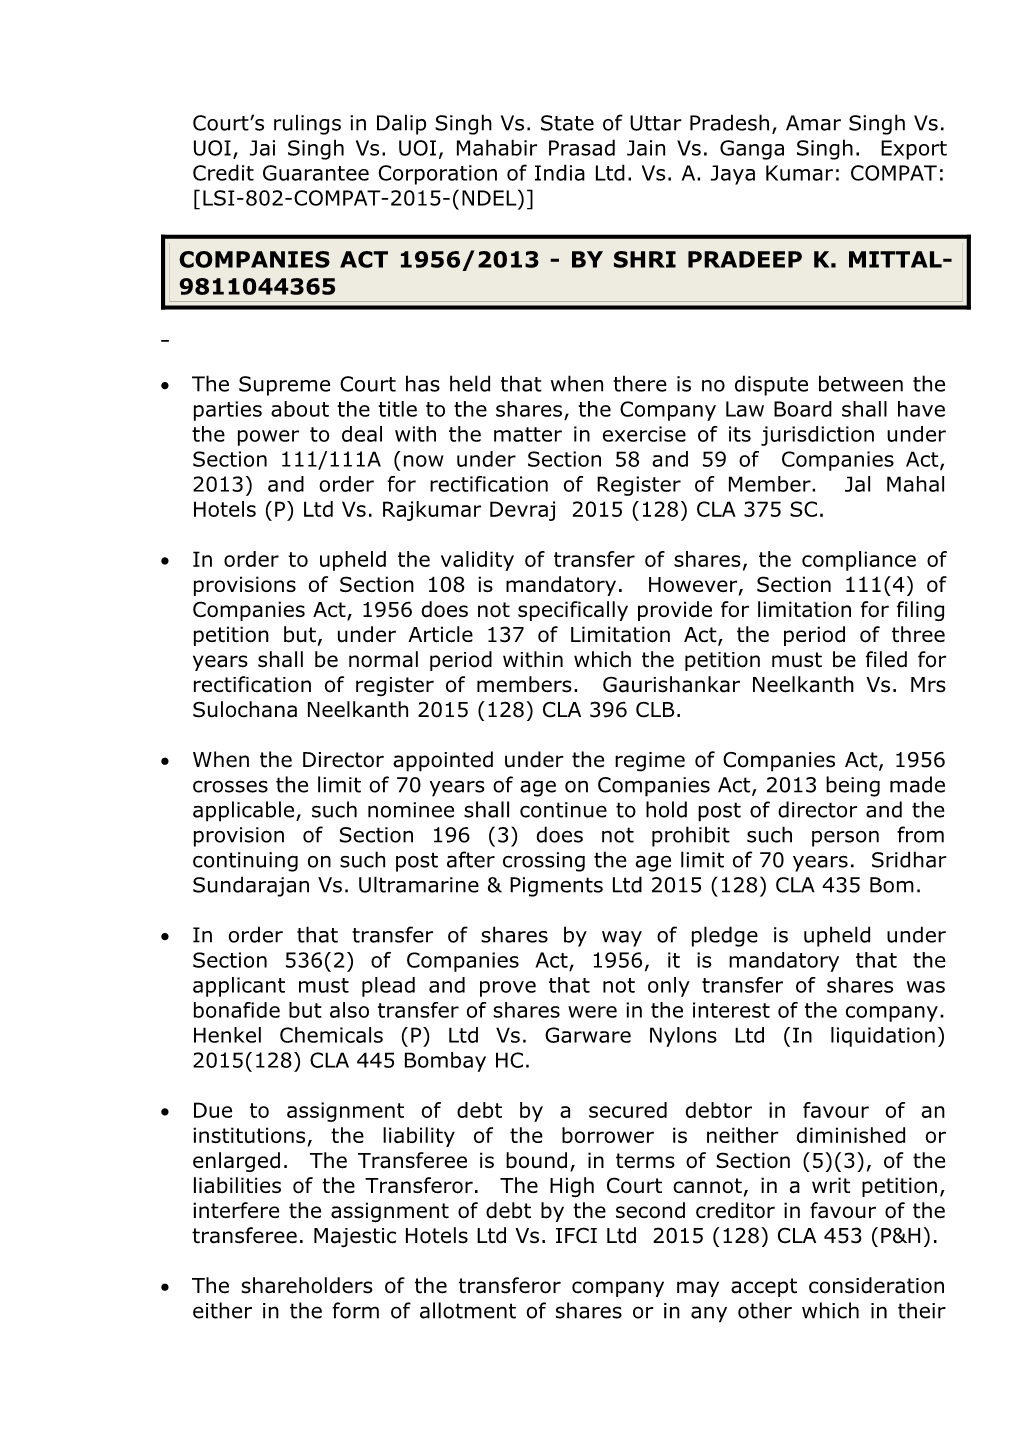 Circulars and Notifications Issued by the Ministry of Corporate Affairs (Mca) in the Month